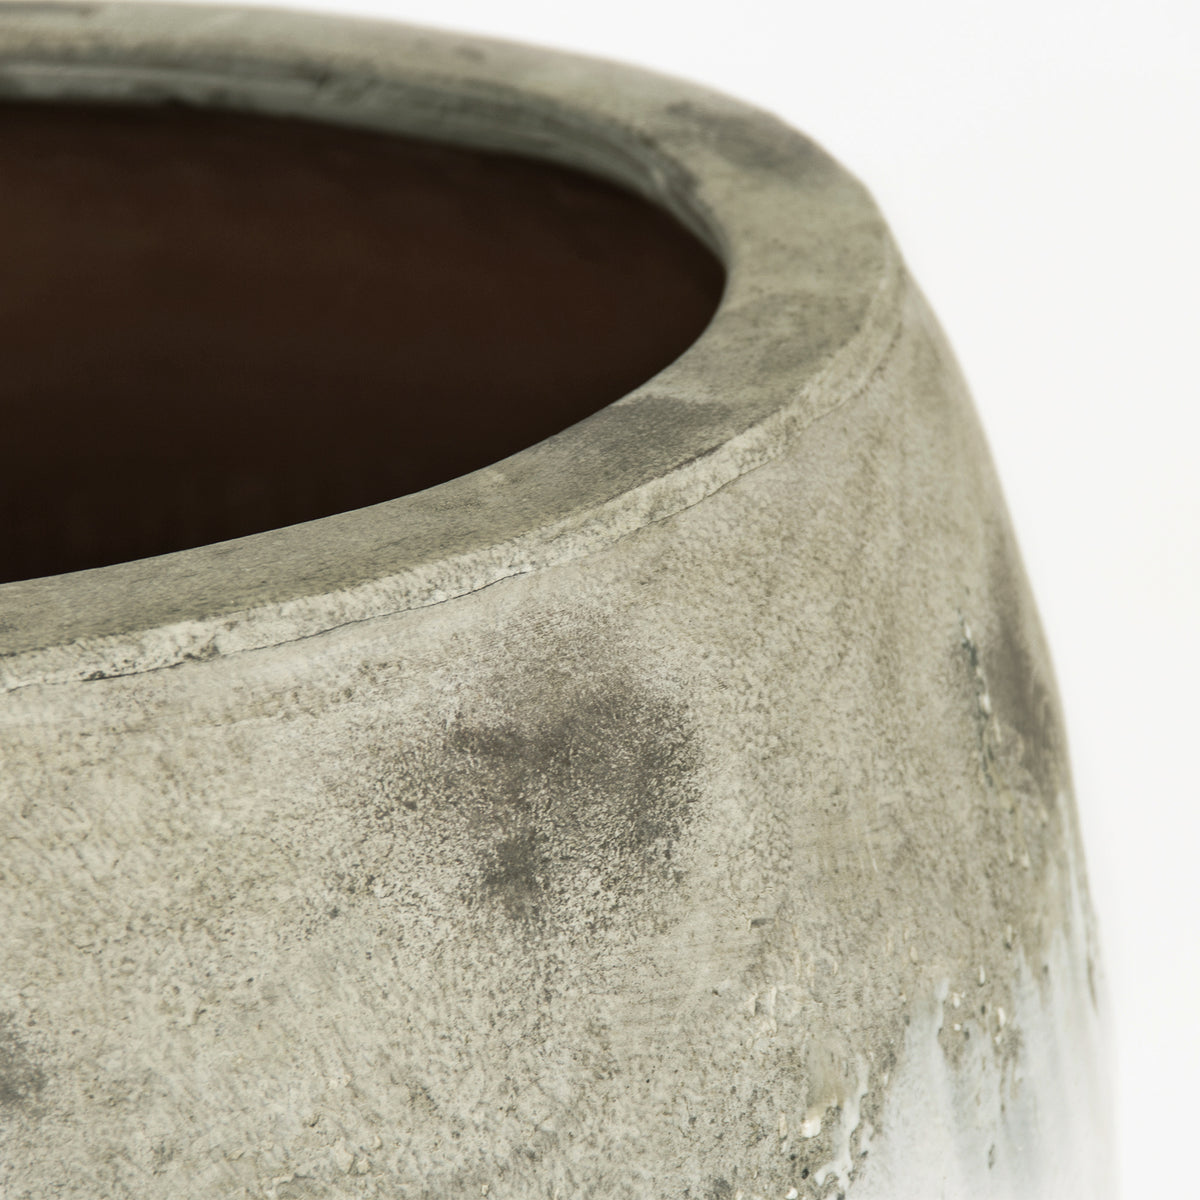 Distressed Off-White Large Vase (14A121) by Zentique